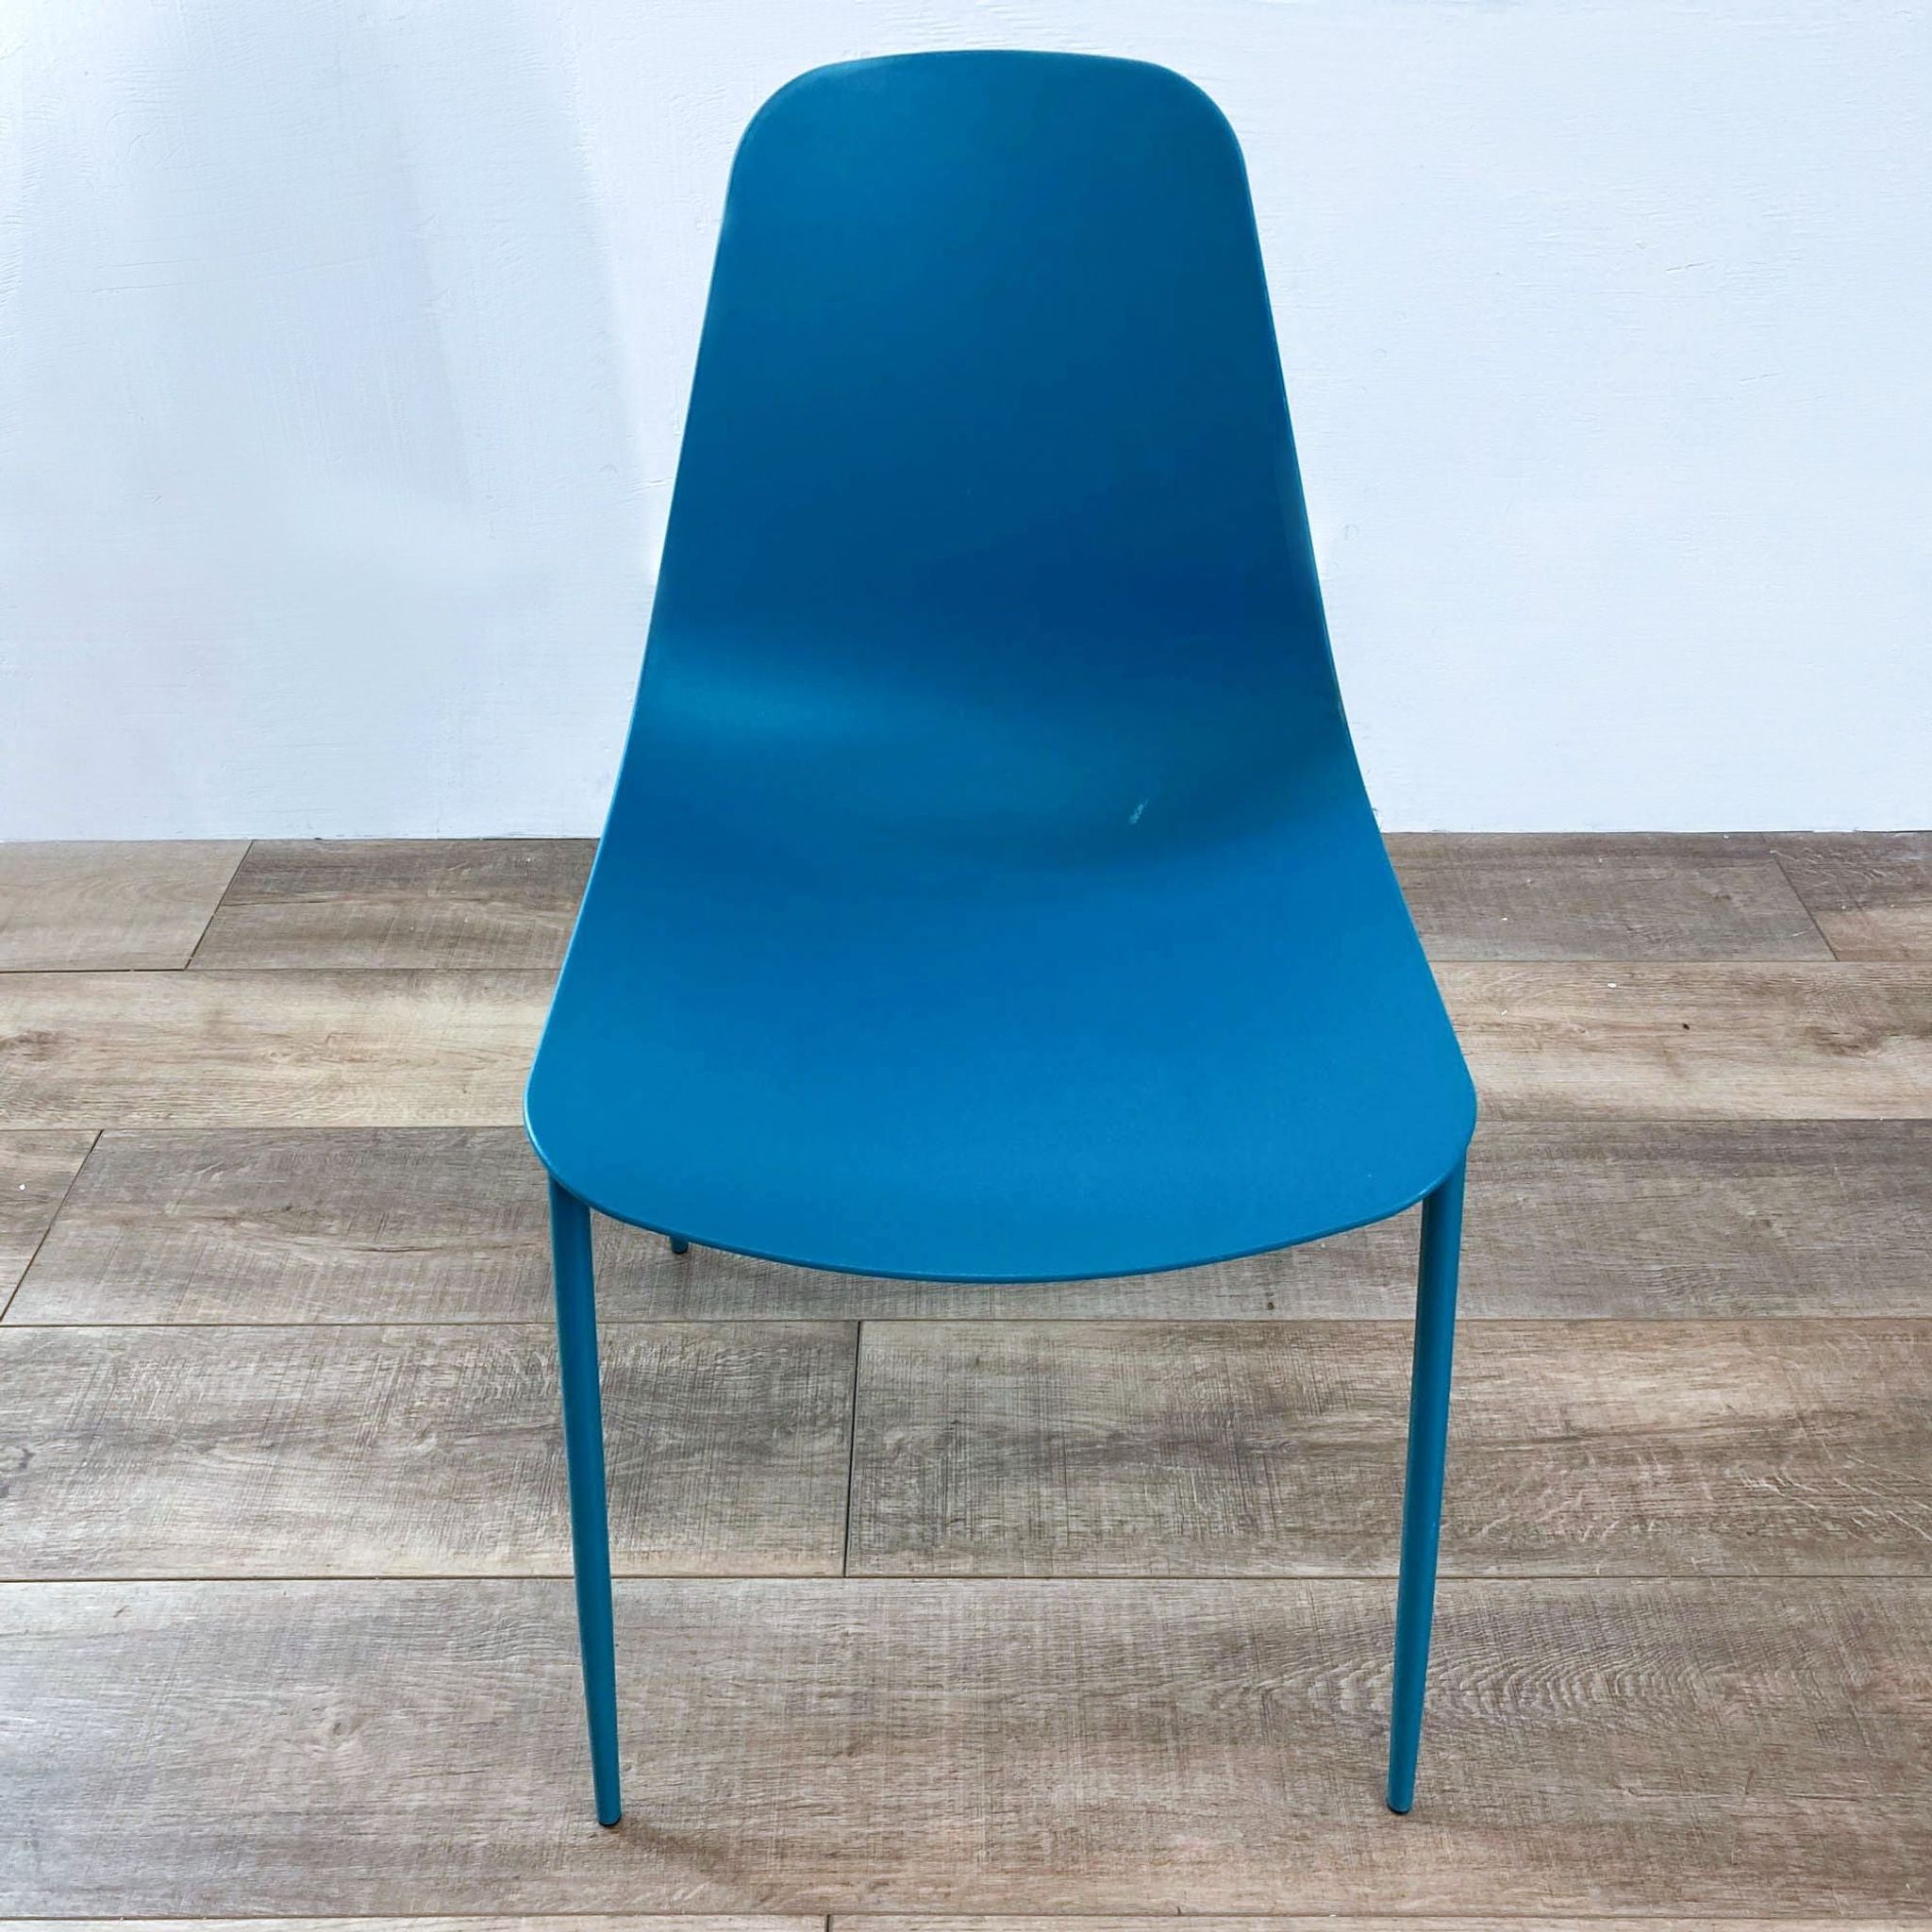 Teal plastic chair with sleek metal legs viewed from the front, against a hardwood floor and white wall.